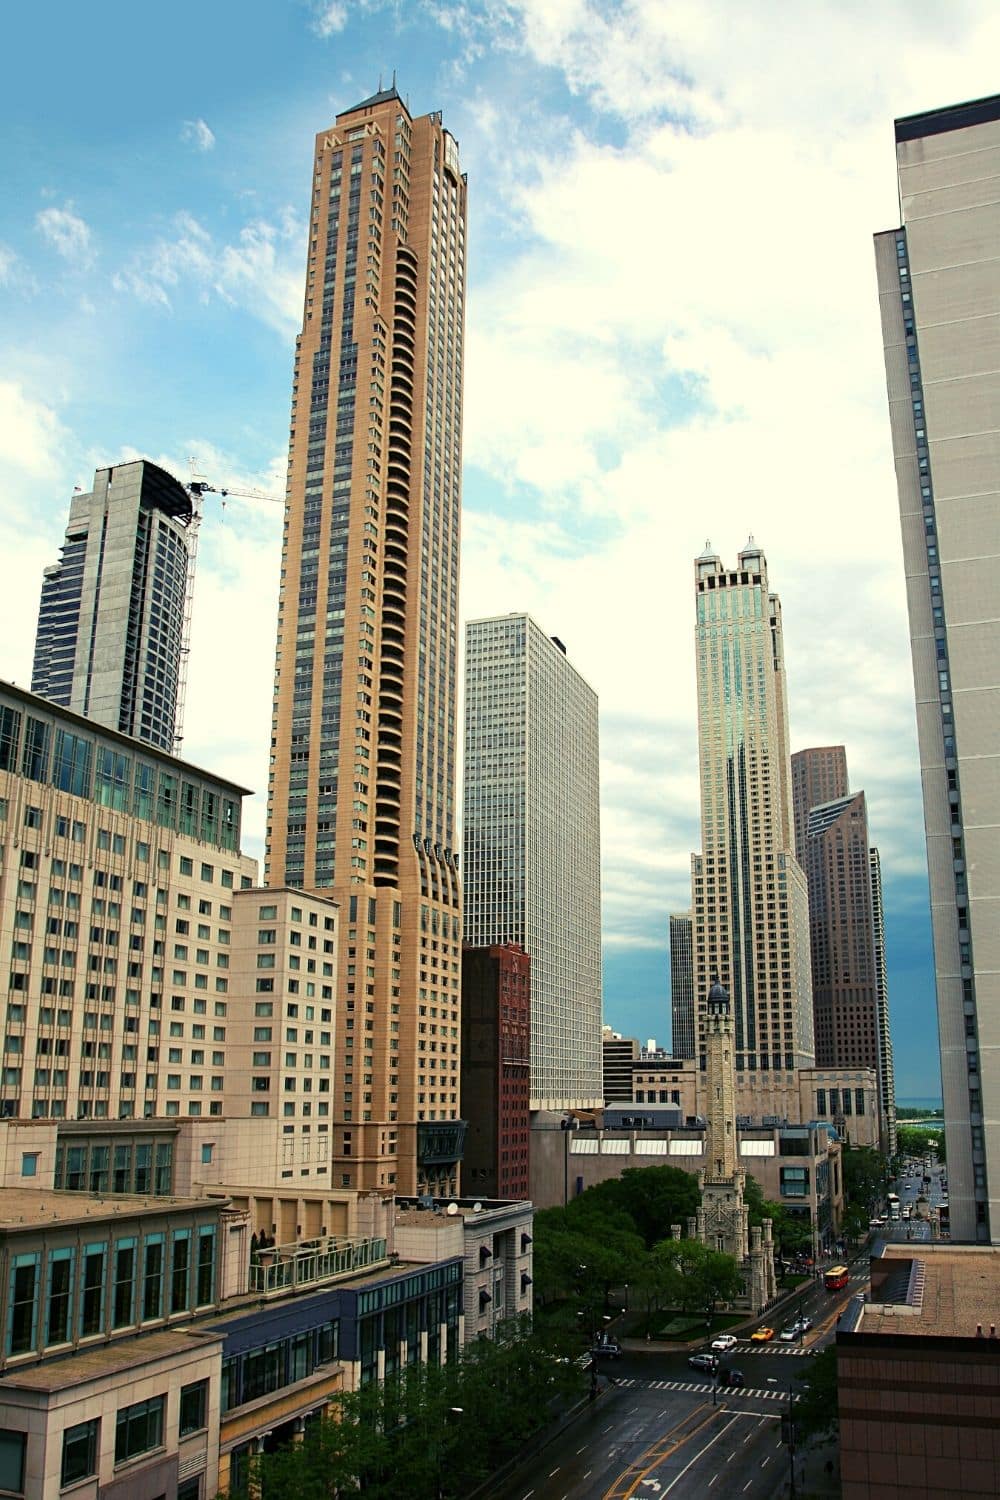 Places to stay Hotels Magnificent Mile Chicago IL